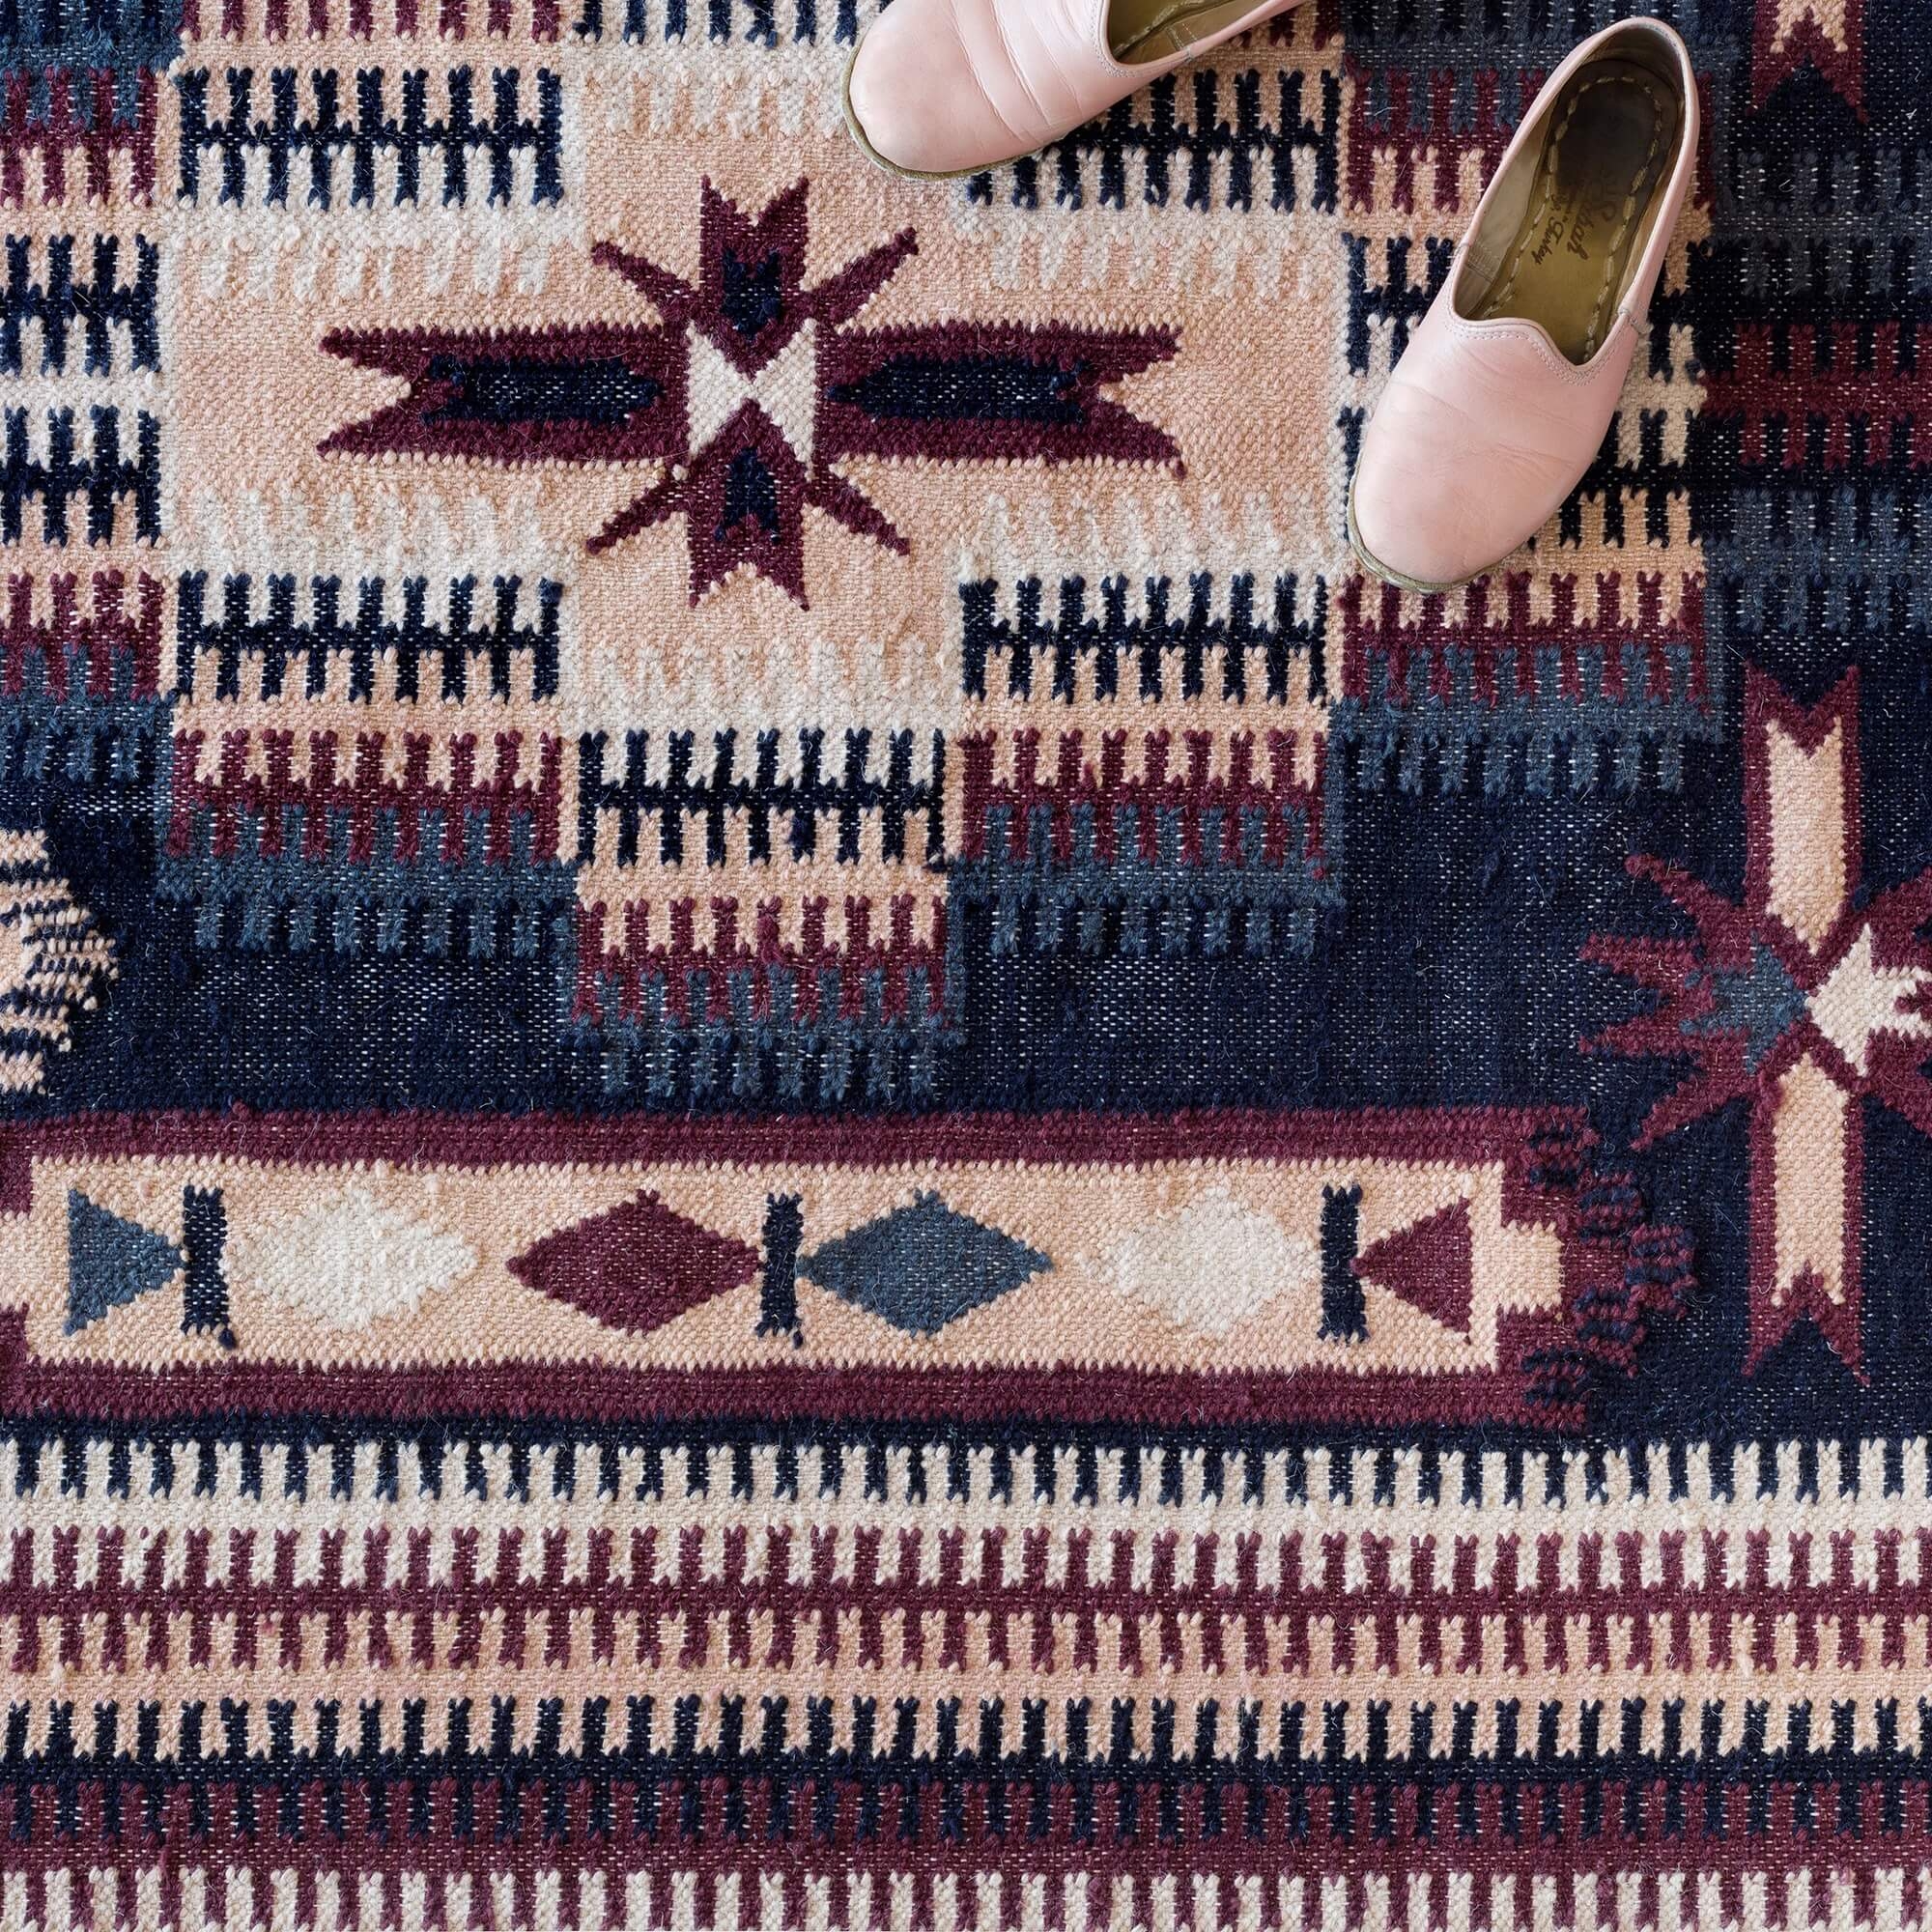 The Citizenry Keya Handwoven Area Rug | 9' x 12' | Made You Blush - Image 3